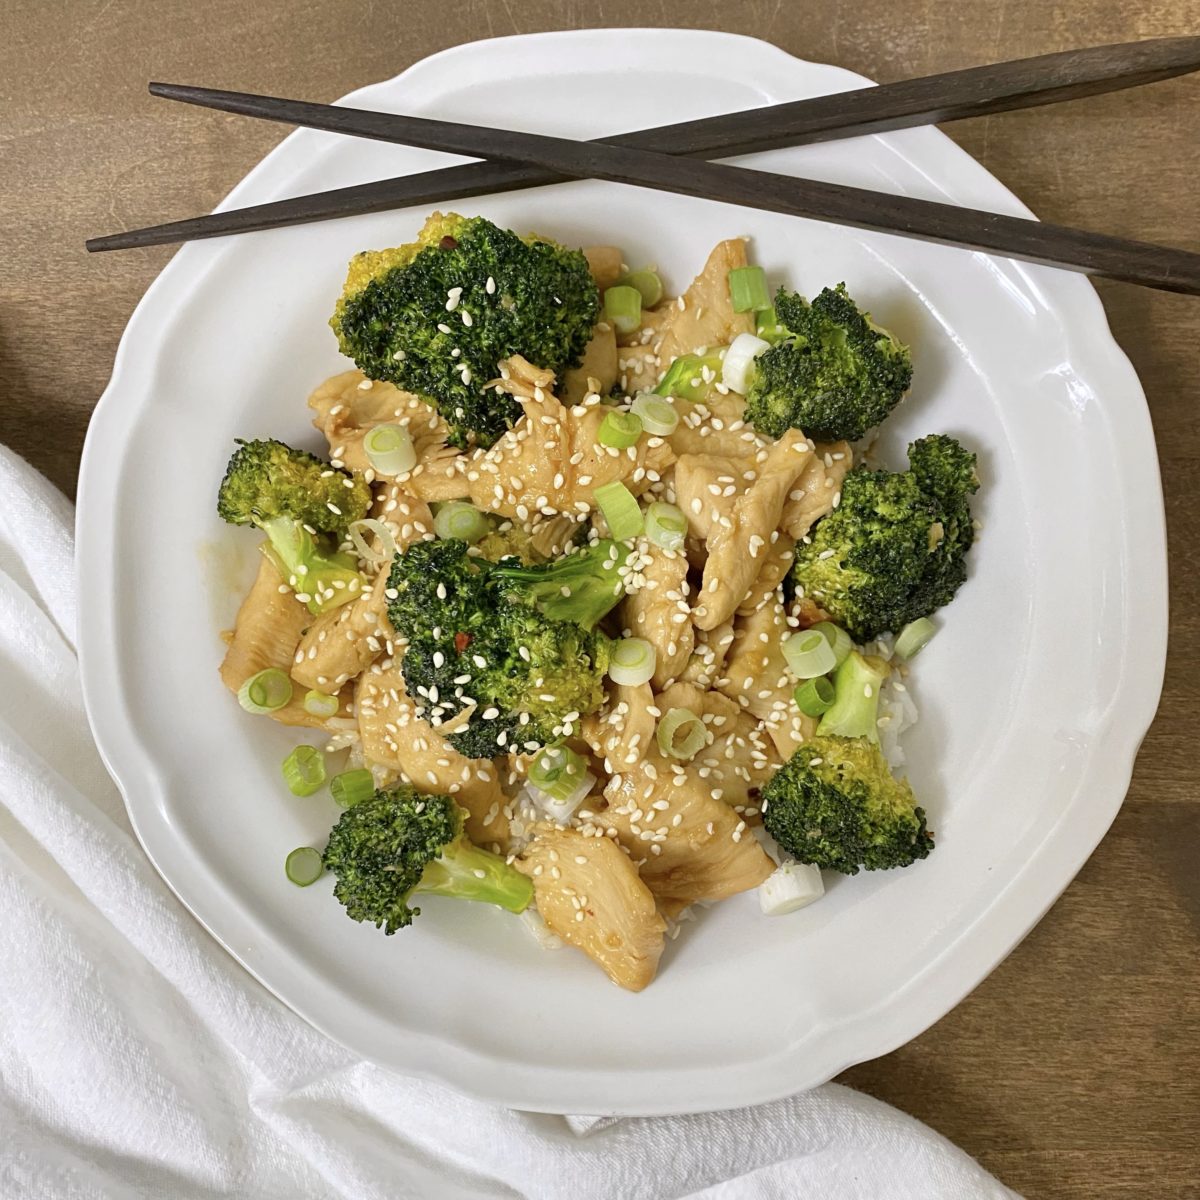 Honey garlic chicken with broccoli in a white bowl with chopsticks on the side.